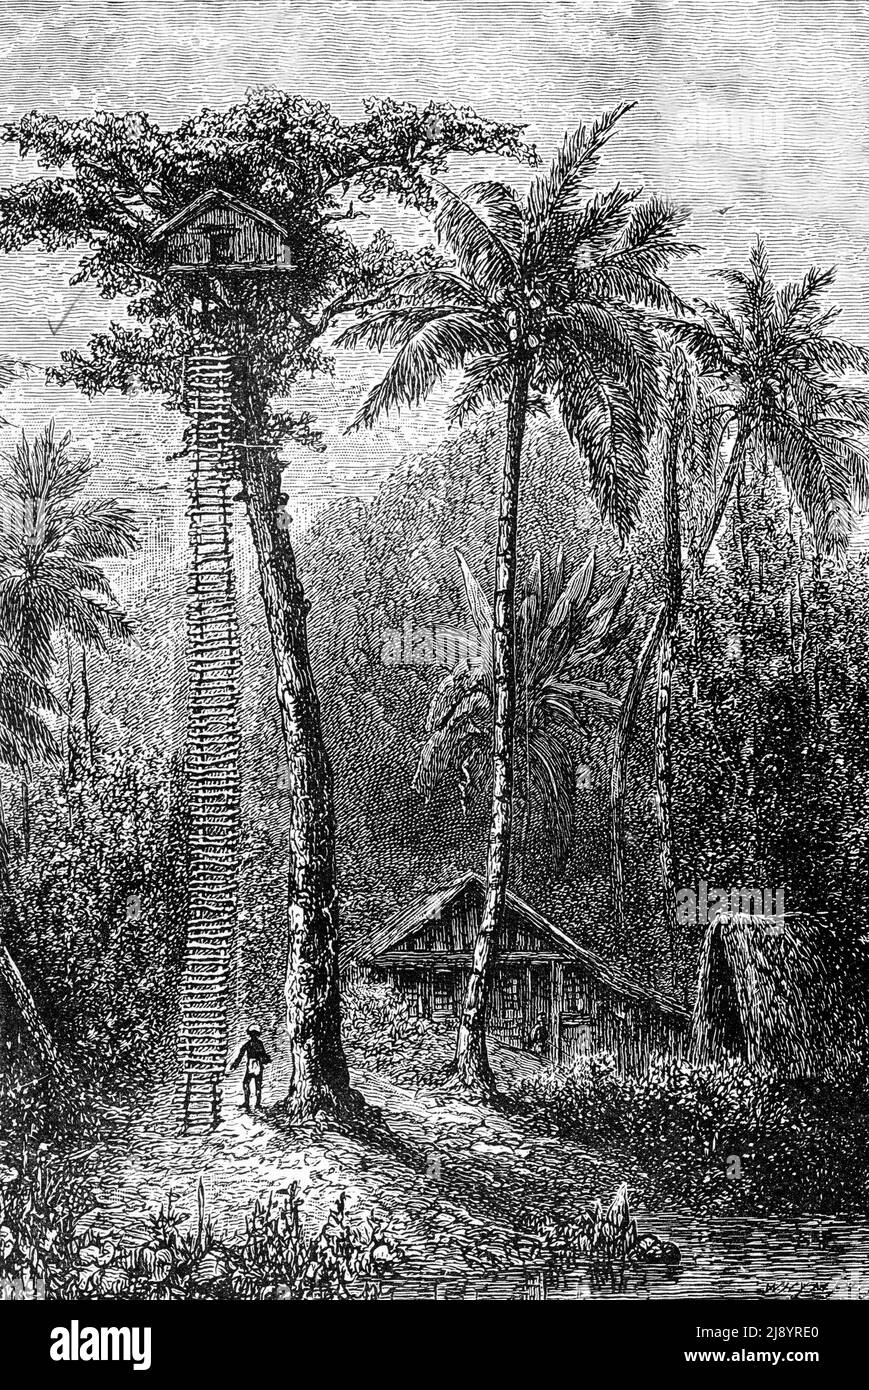 Engraving of a tree house built in a tall palm tree in Papua New Guinea during the 1880s Stock Photo